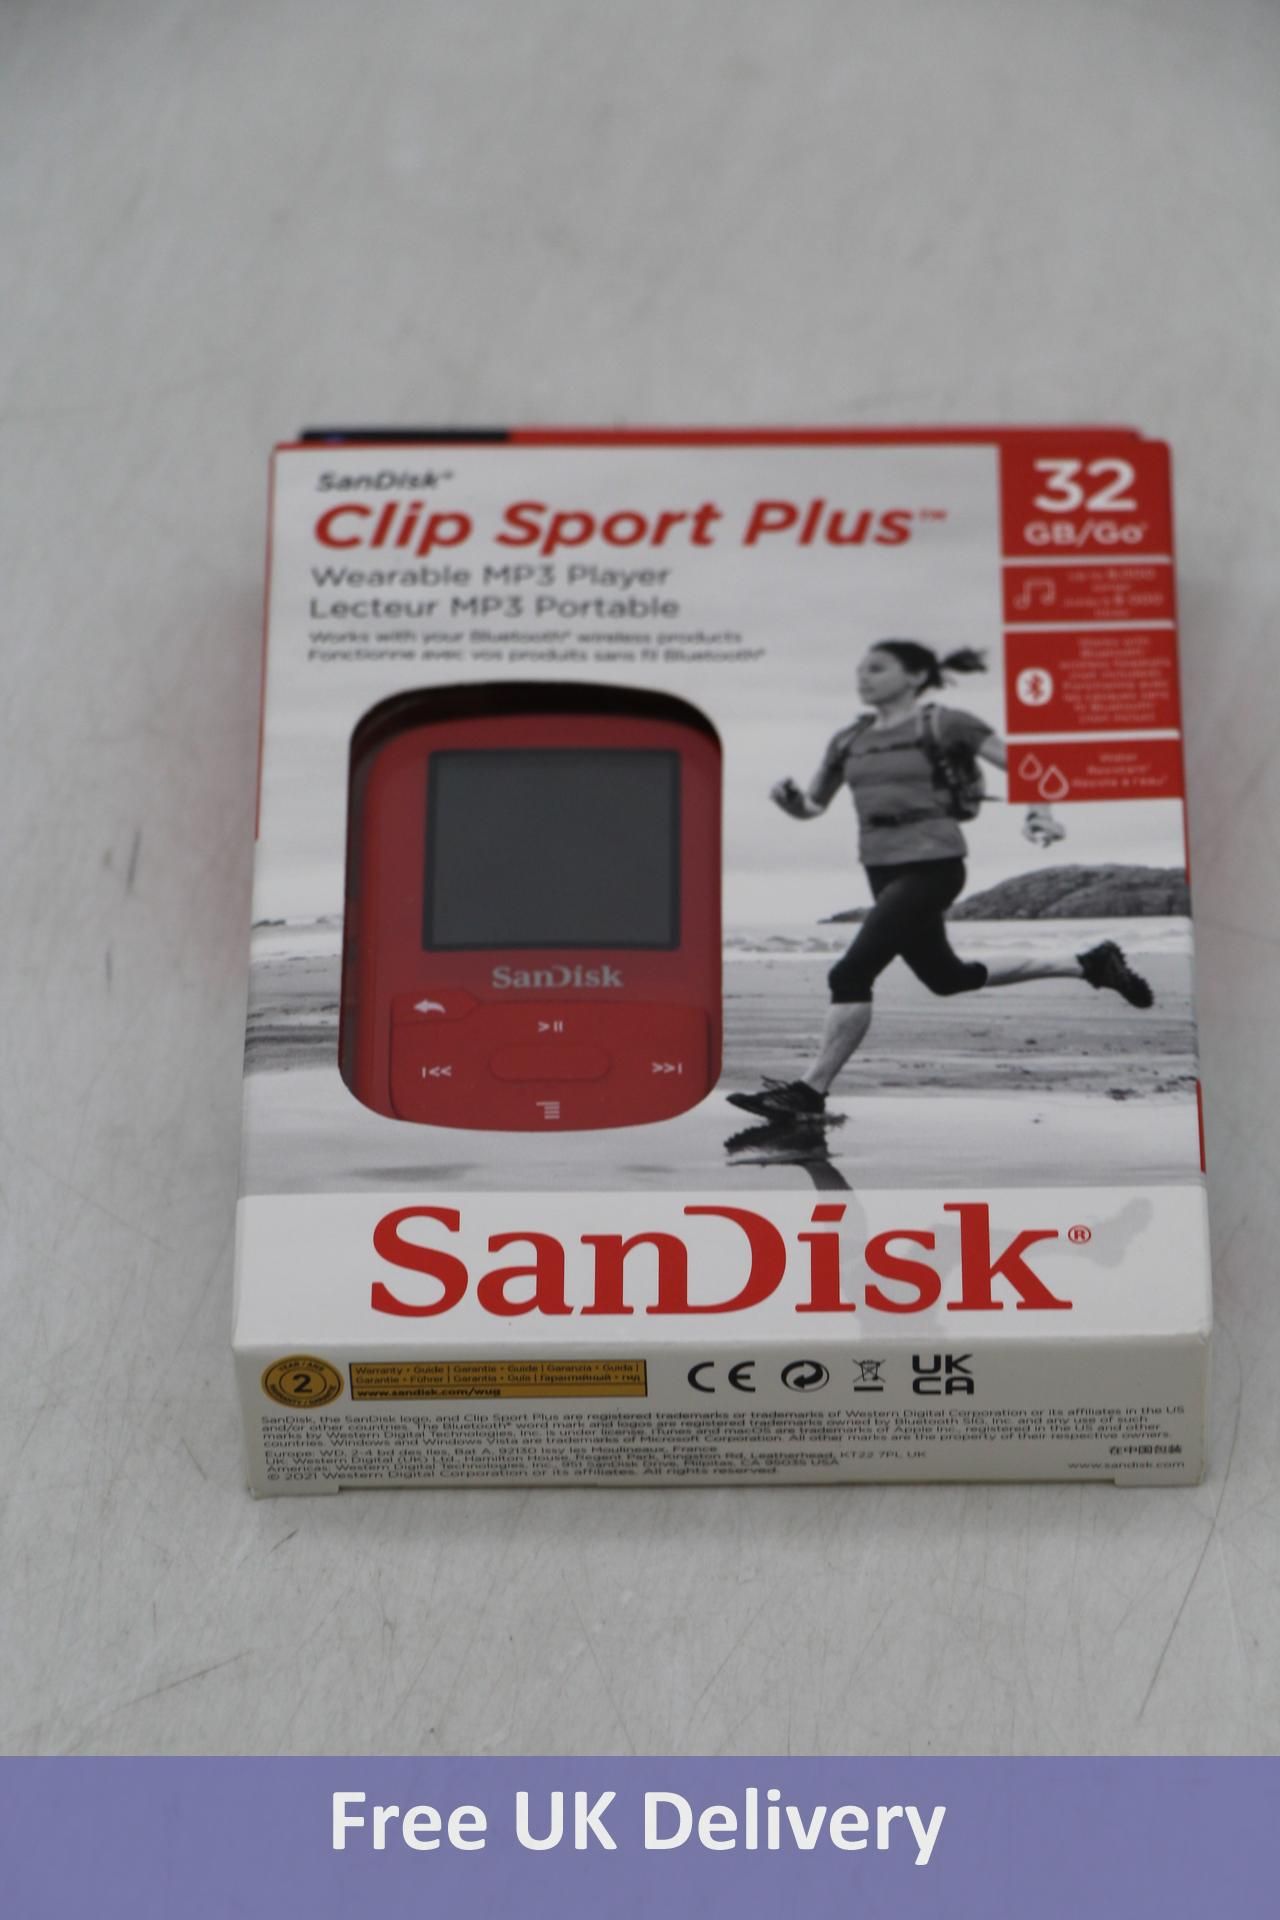 SanDisk Clip Sport Plus MP3 Player, Red, 32Gb